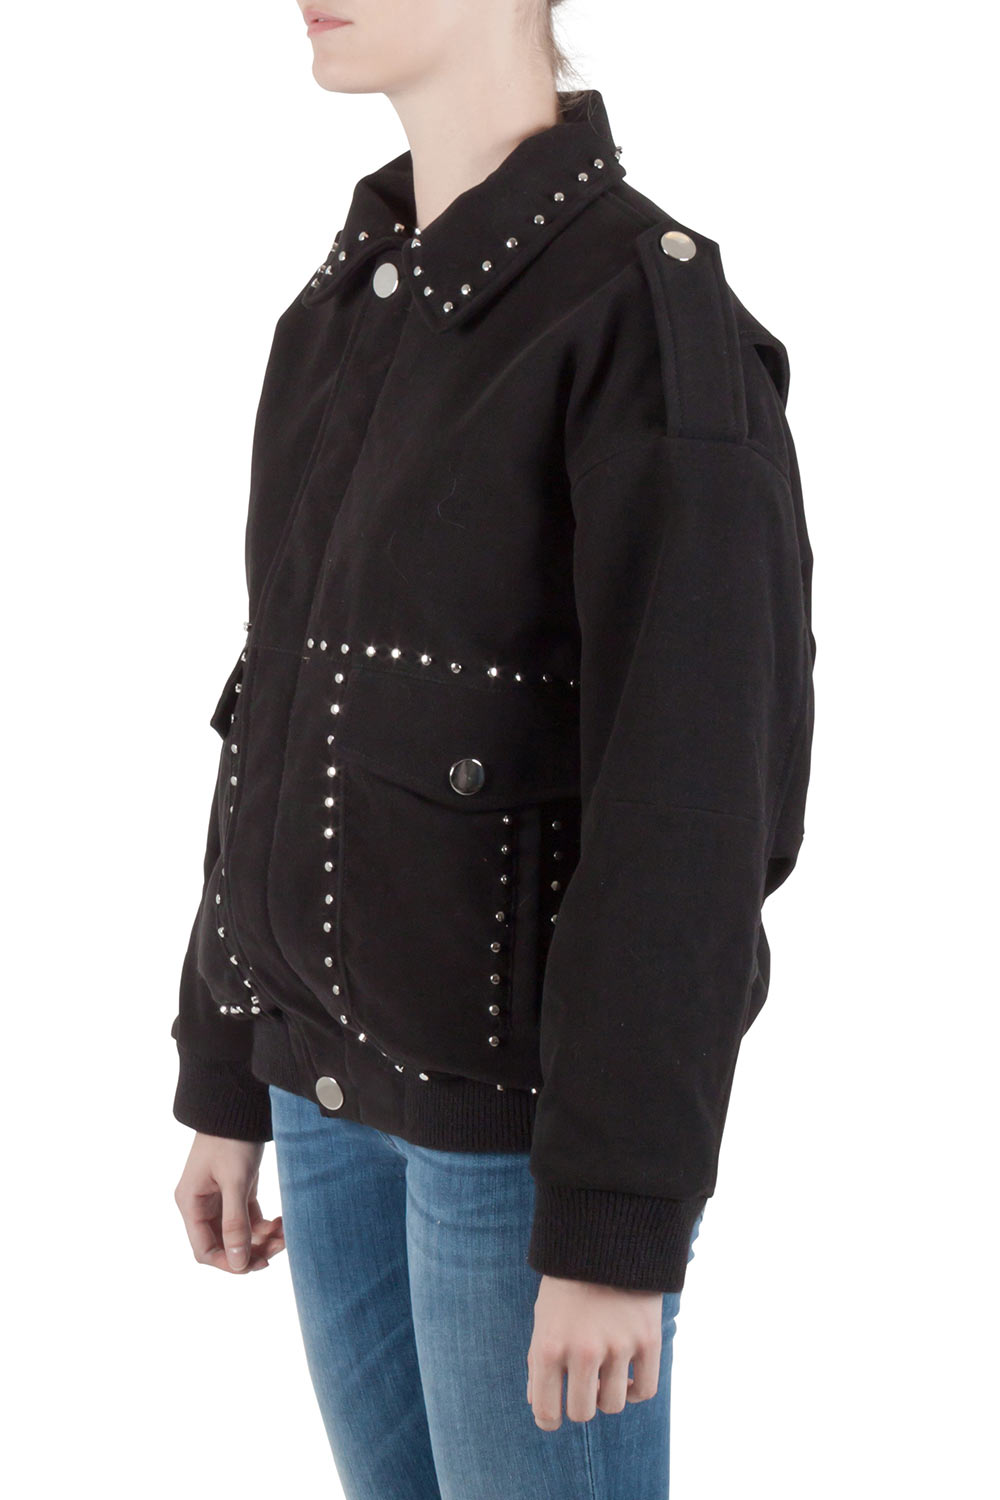 Pre-owned Faith Connexion Black Suede Studded Oversized Bomber Jacket M